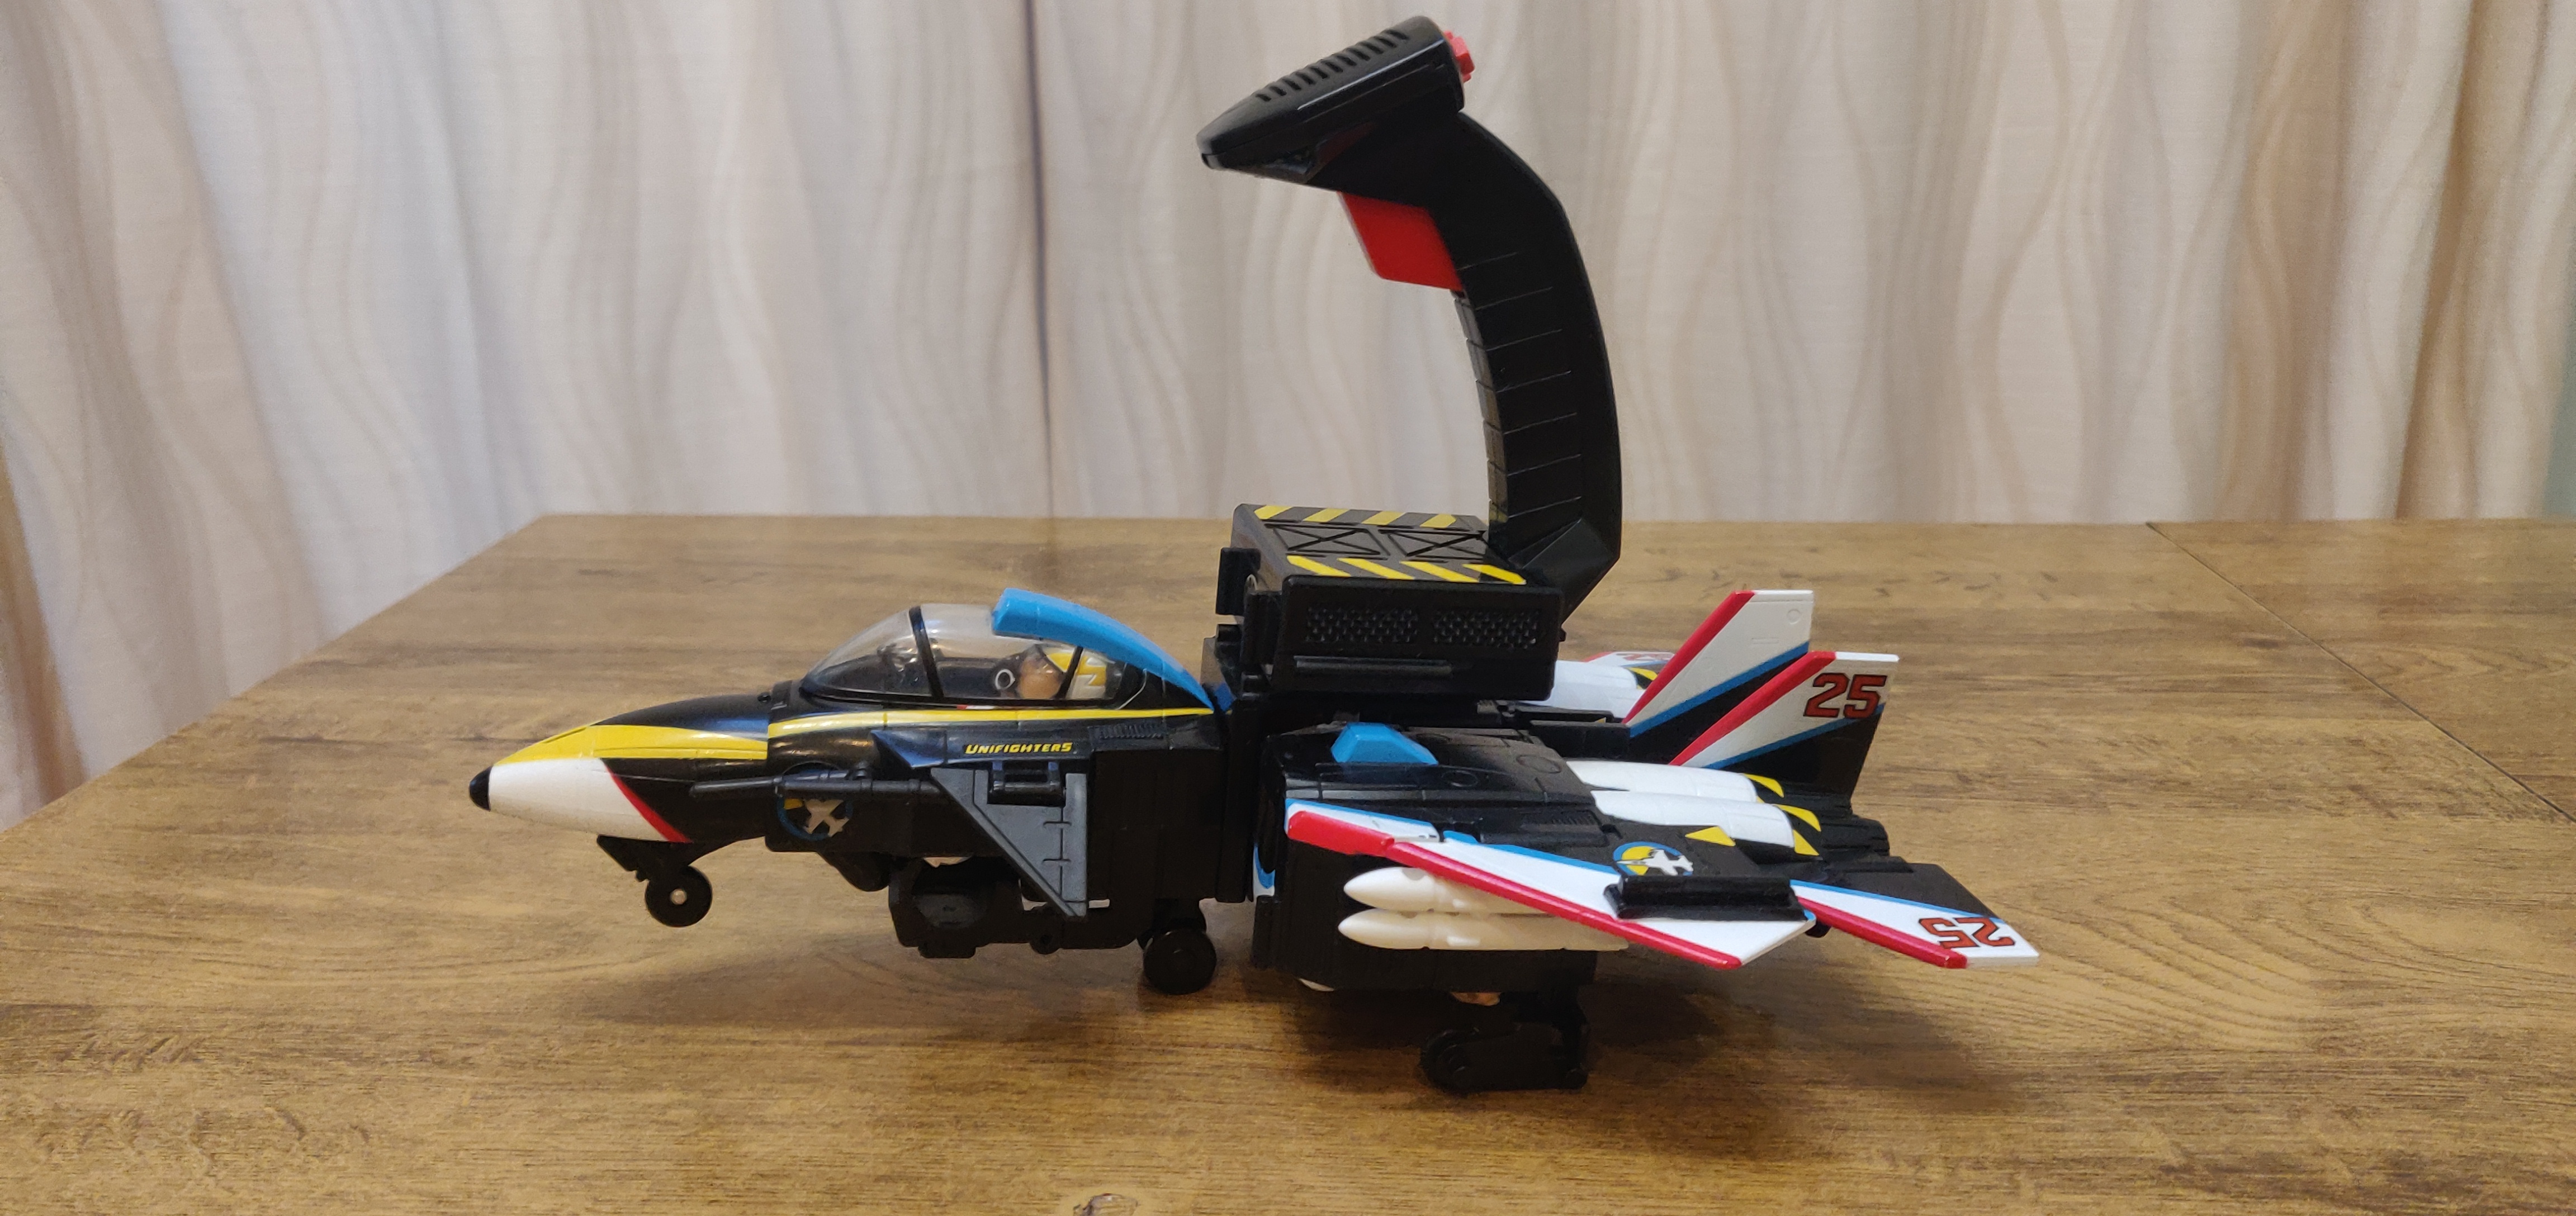 UNIFIGHTERS - Galoob 1990 S4rw